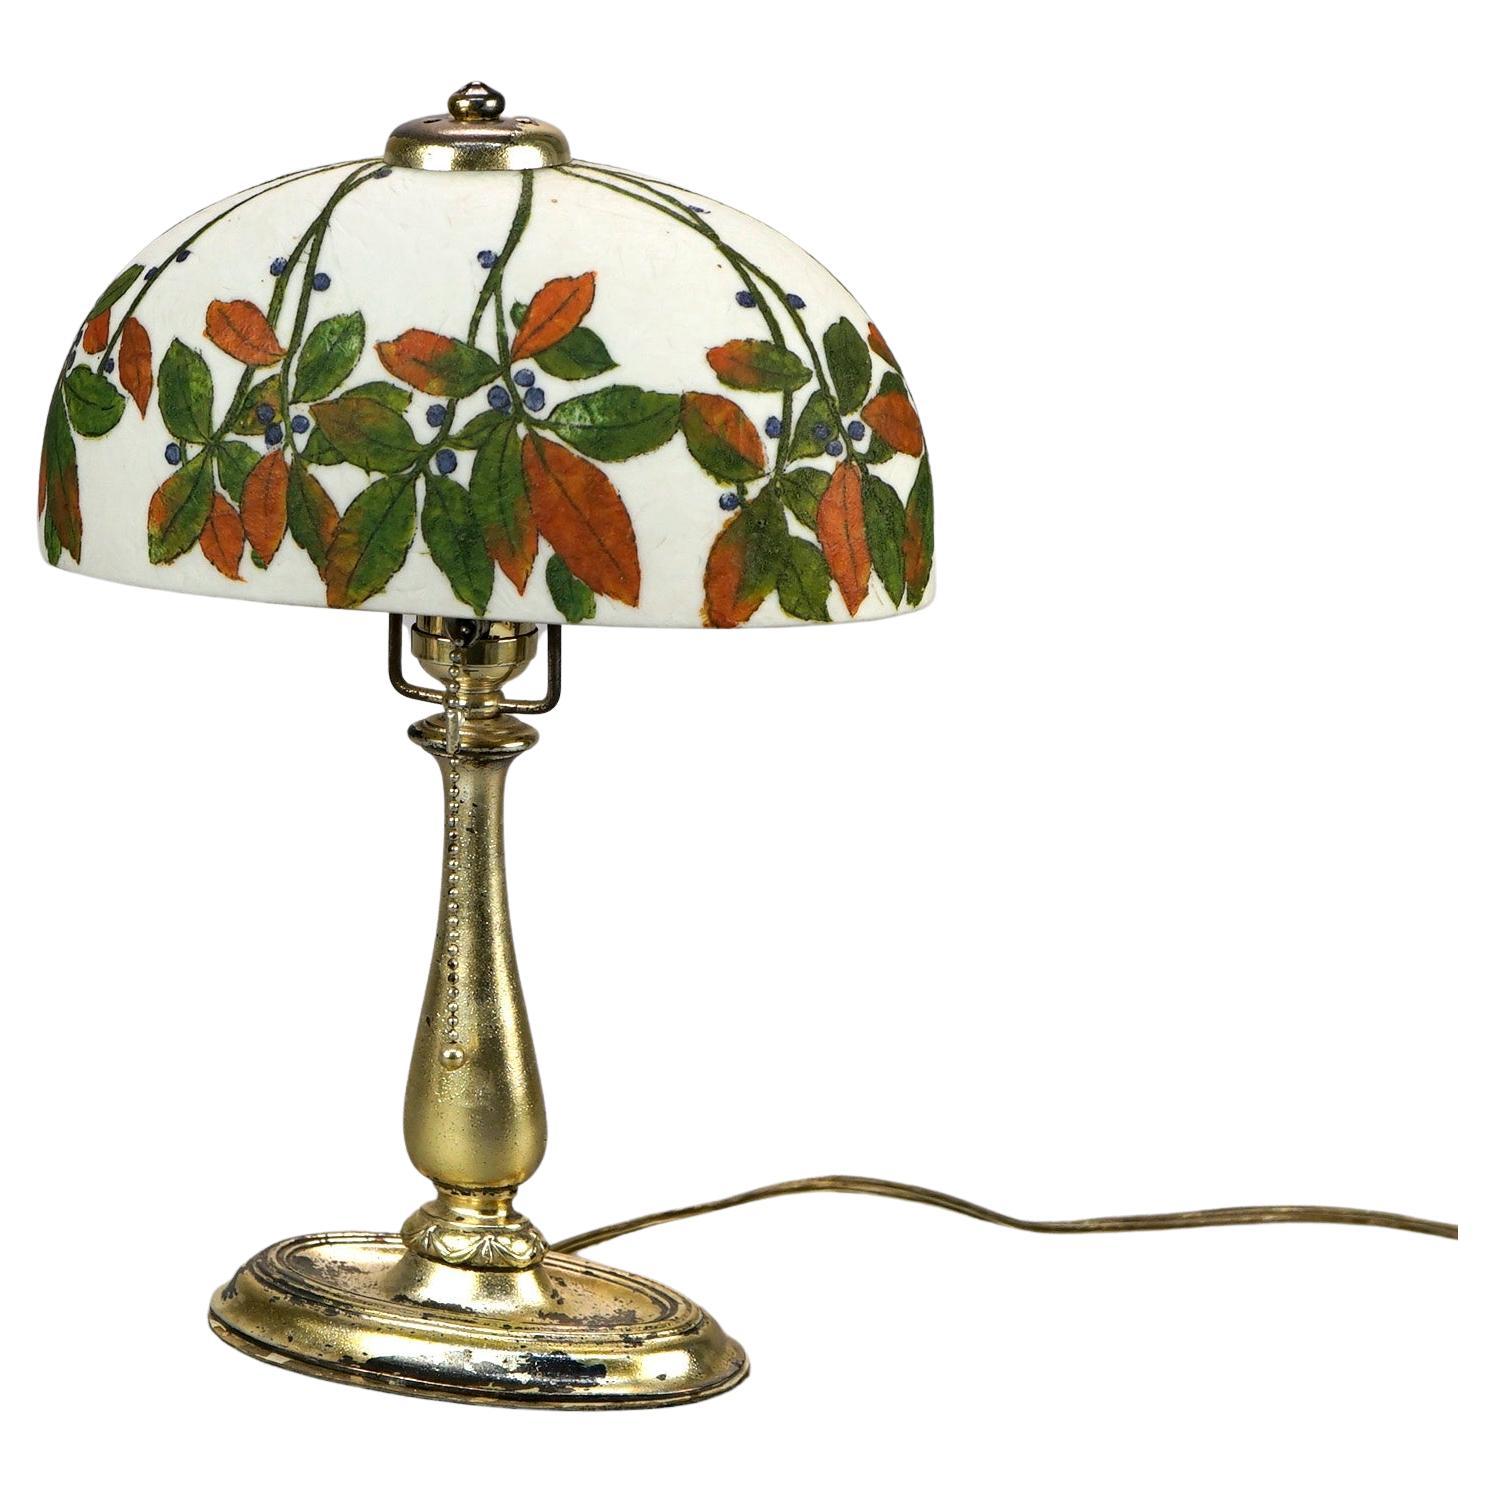 Arts and Crafts Rare Antique Handel Oval Leaf & Berry Shade Boudoir Lamp, Signed, c1920